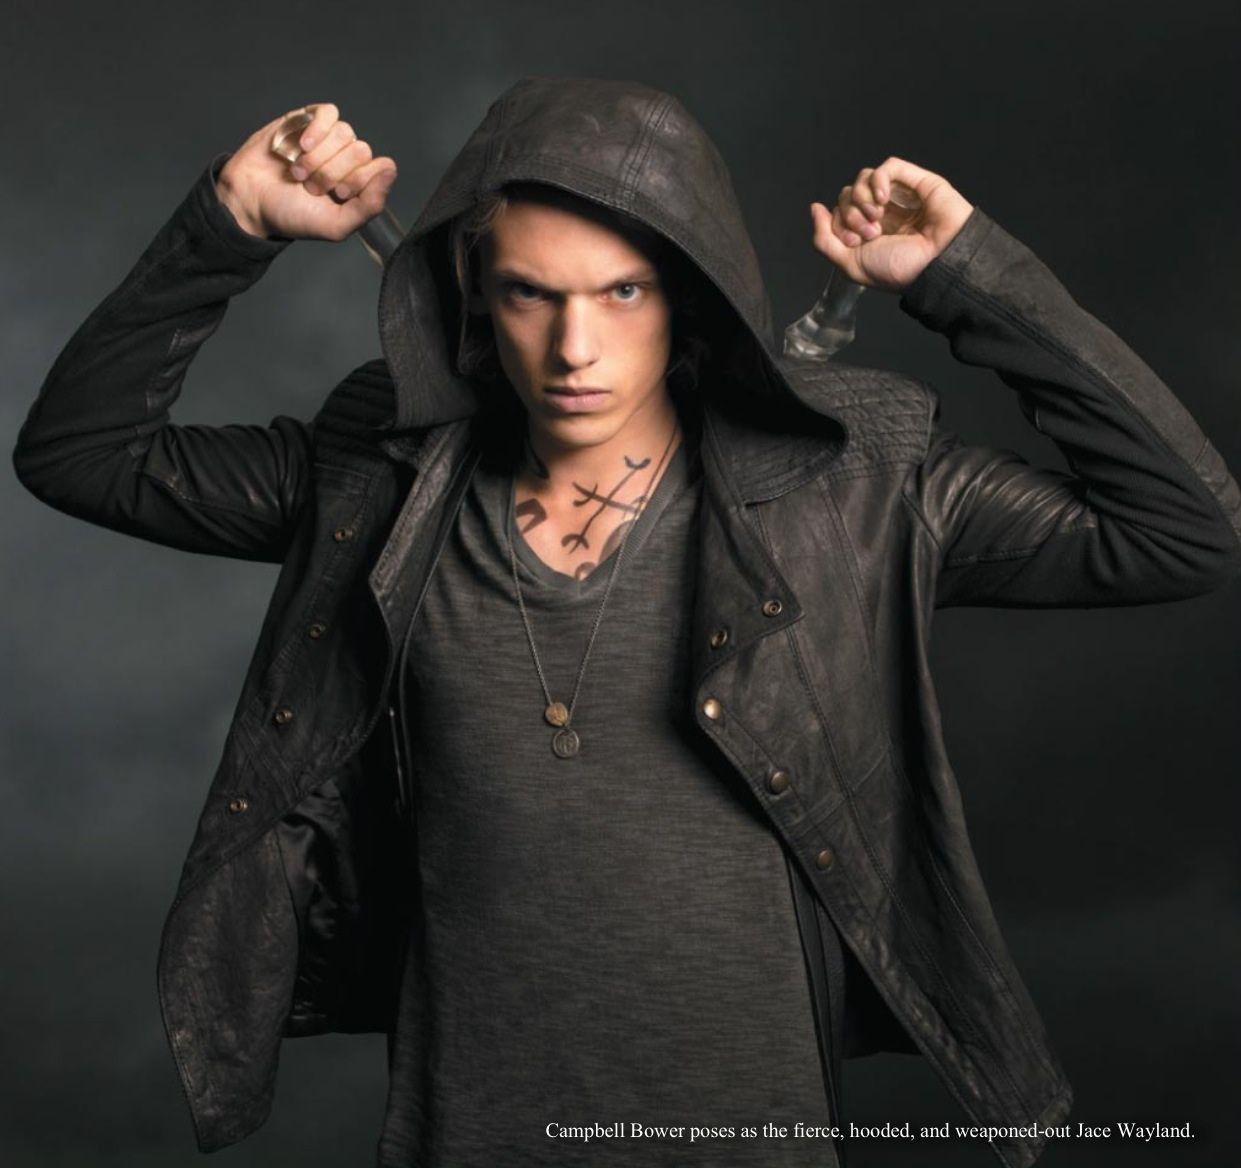 Jace in the TMICOB official illustrated companion